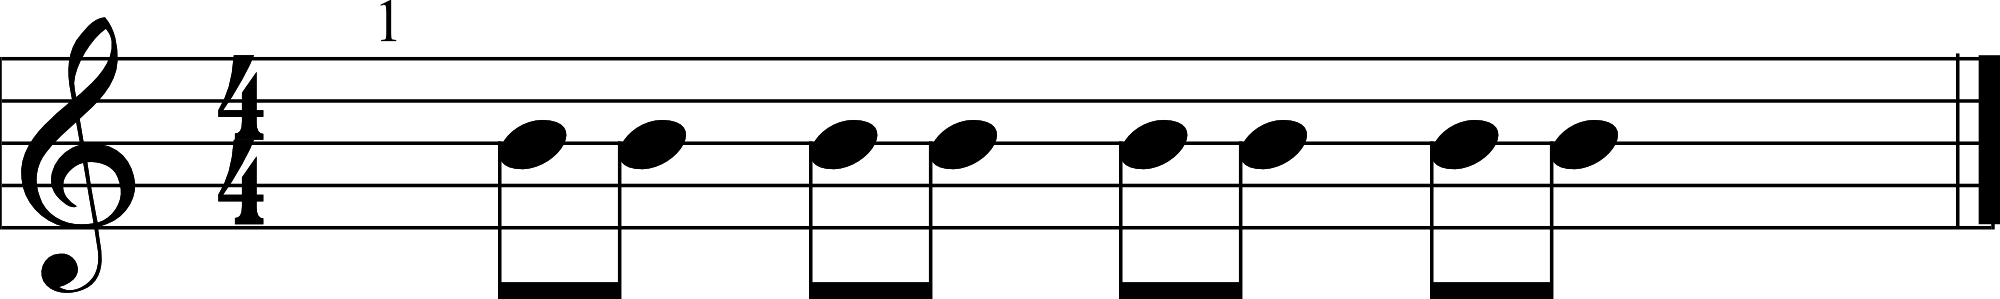 Eighth Note Example